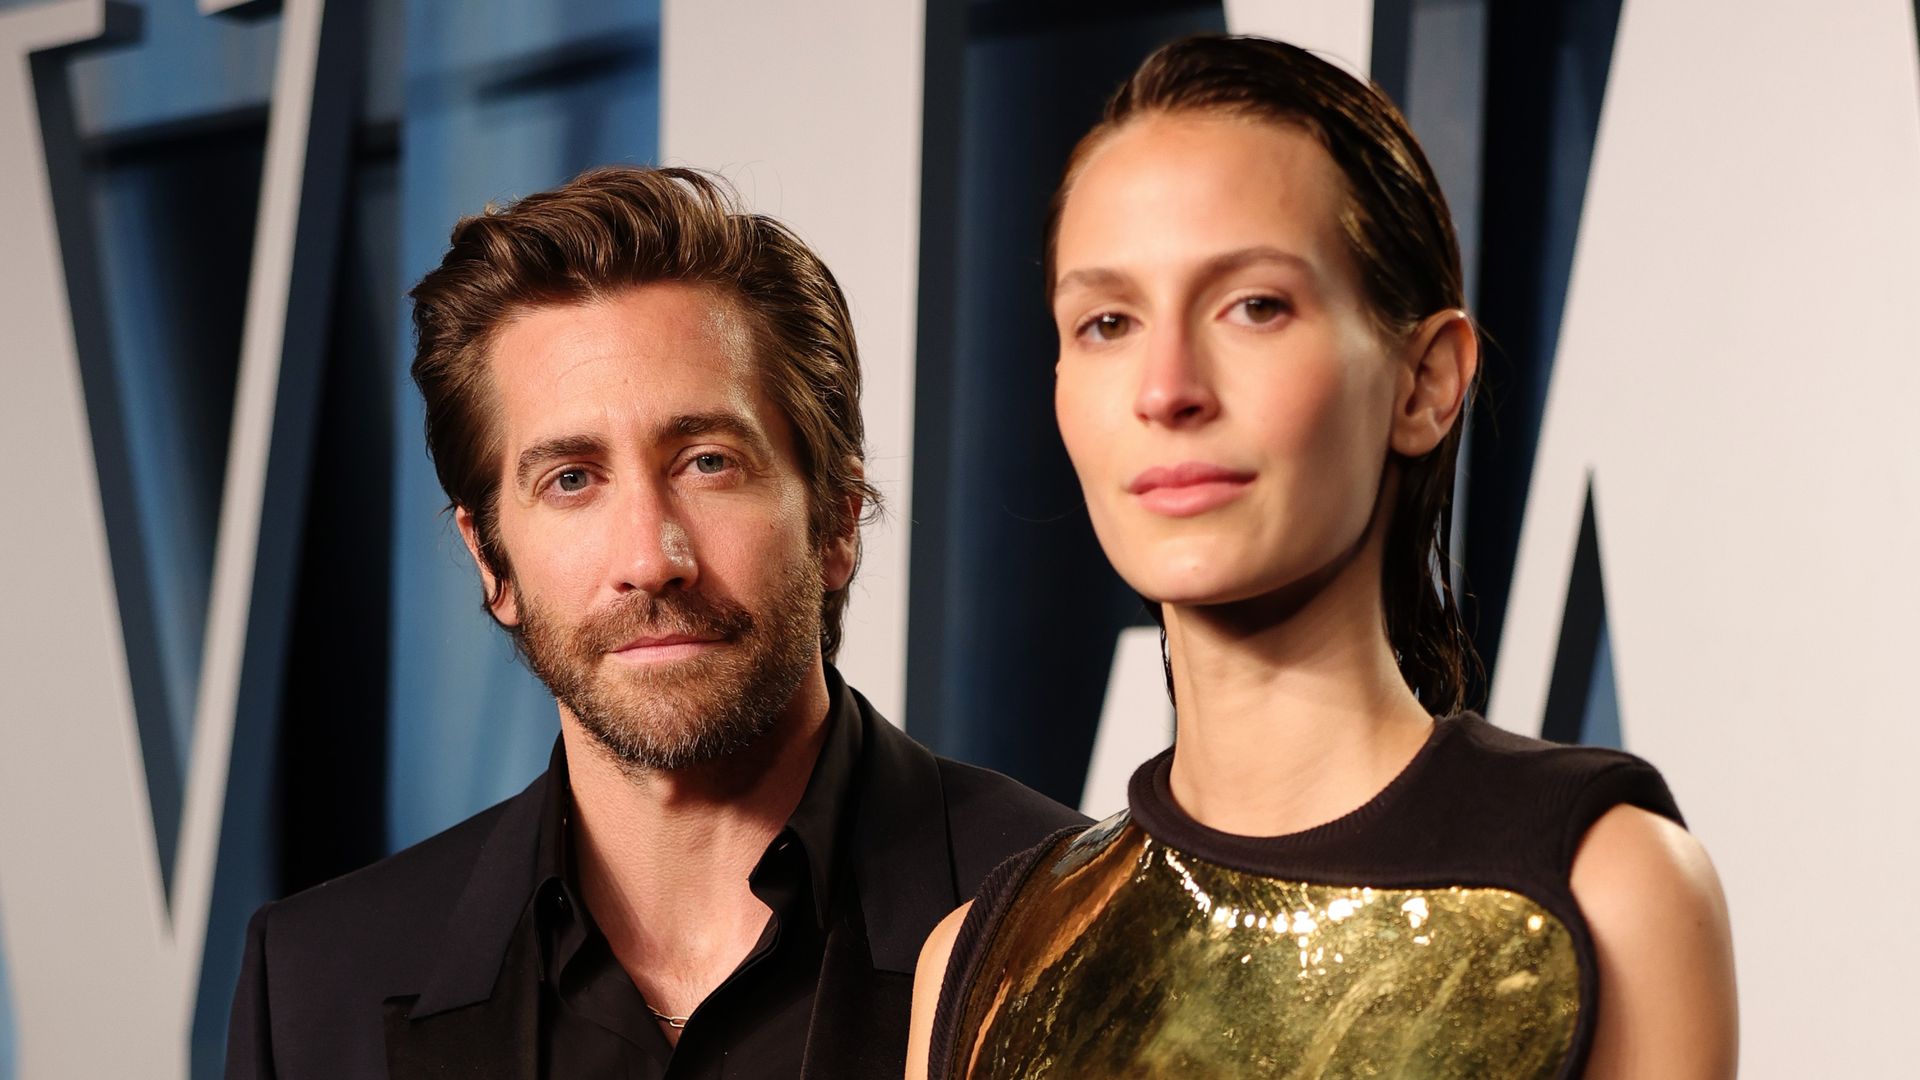 Jake Gyllenhaal and Jeanne Cadieu attend the 2022 Vanity Fair Oscar Party hosted by Radhika Jones at Wallis Annenberg Center for the Performing Arts on March 27, 2022 in Beverly Hills, California